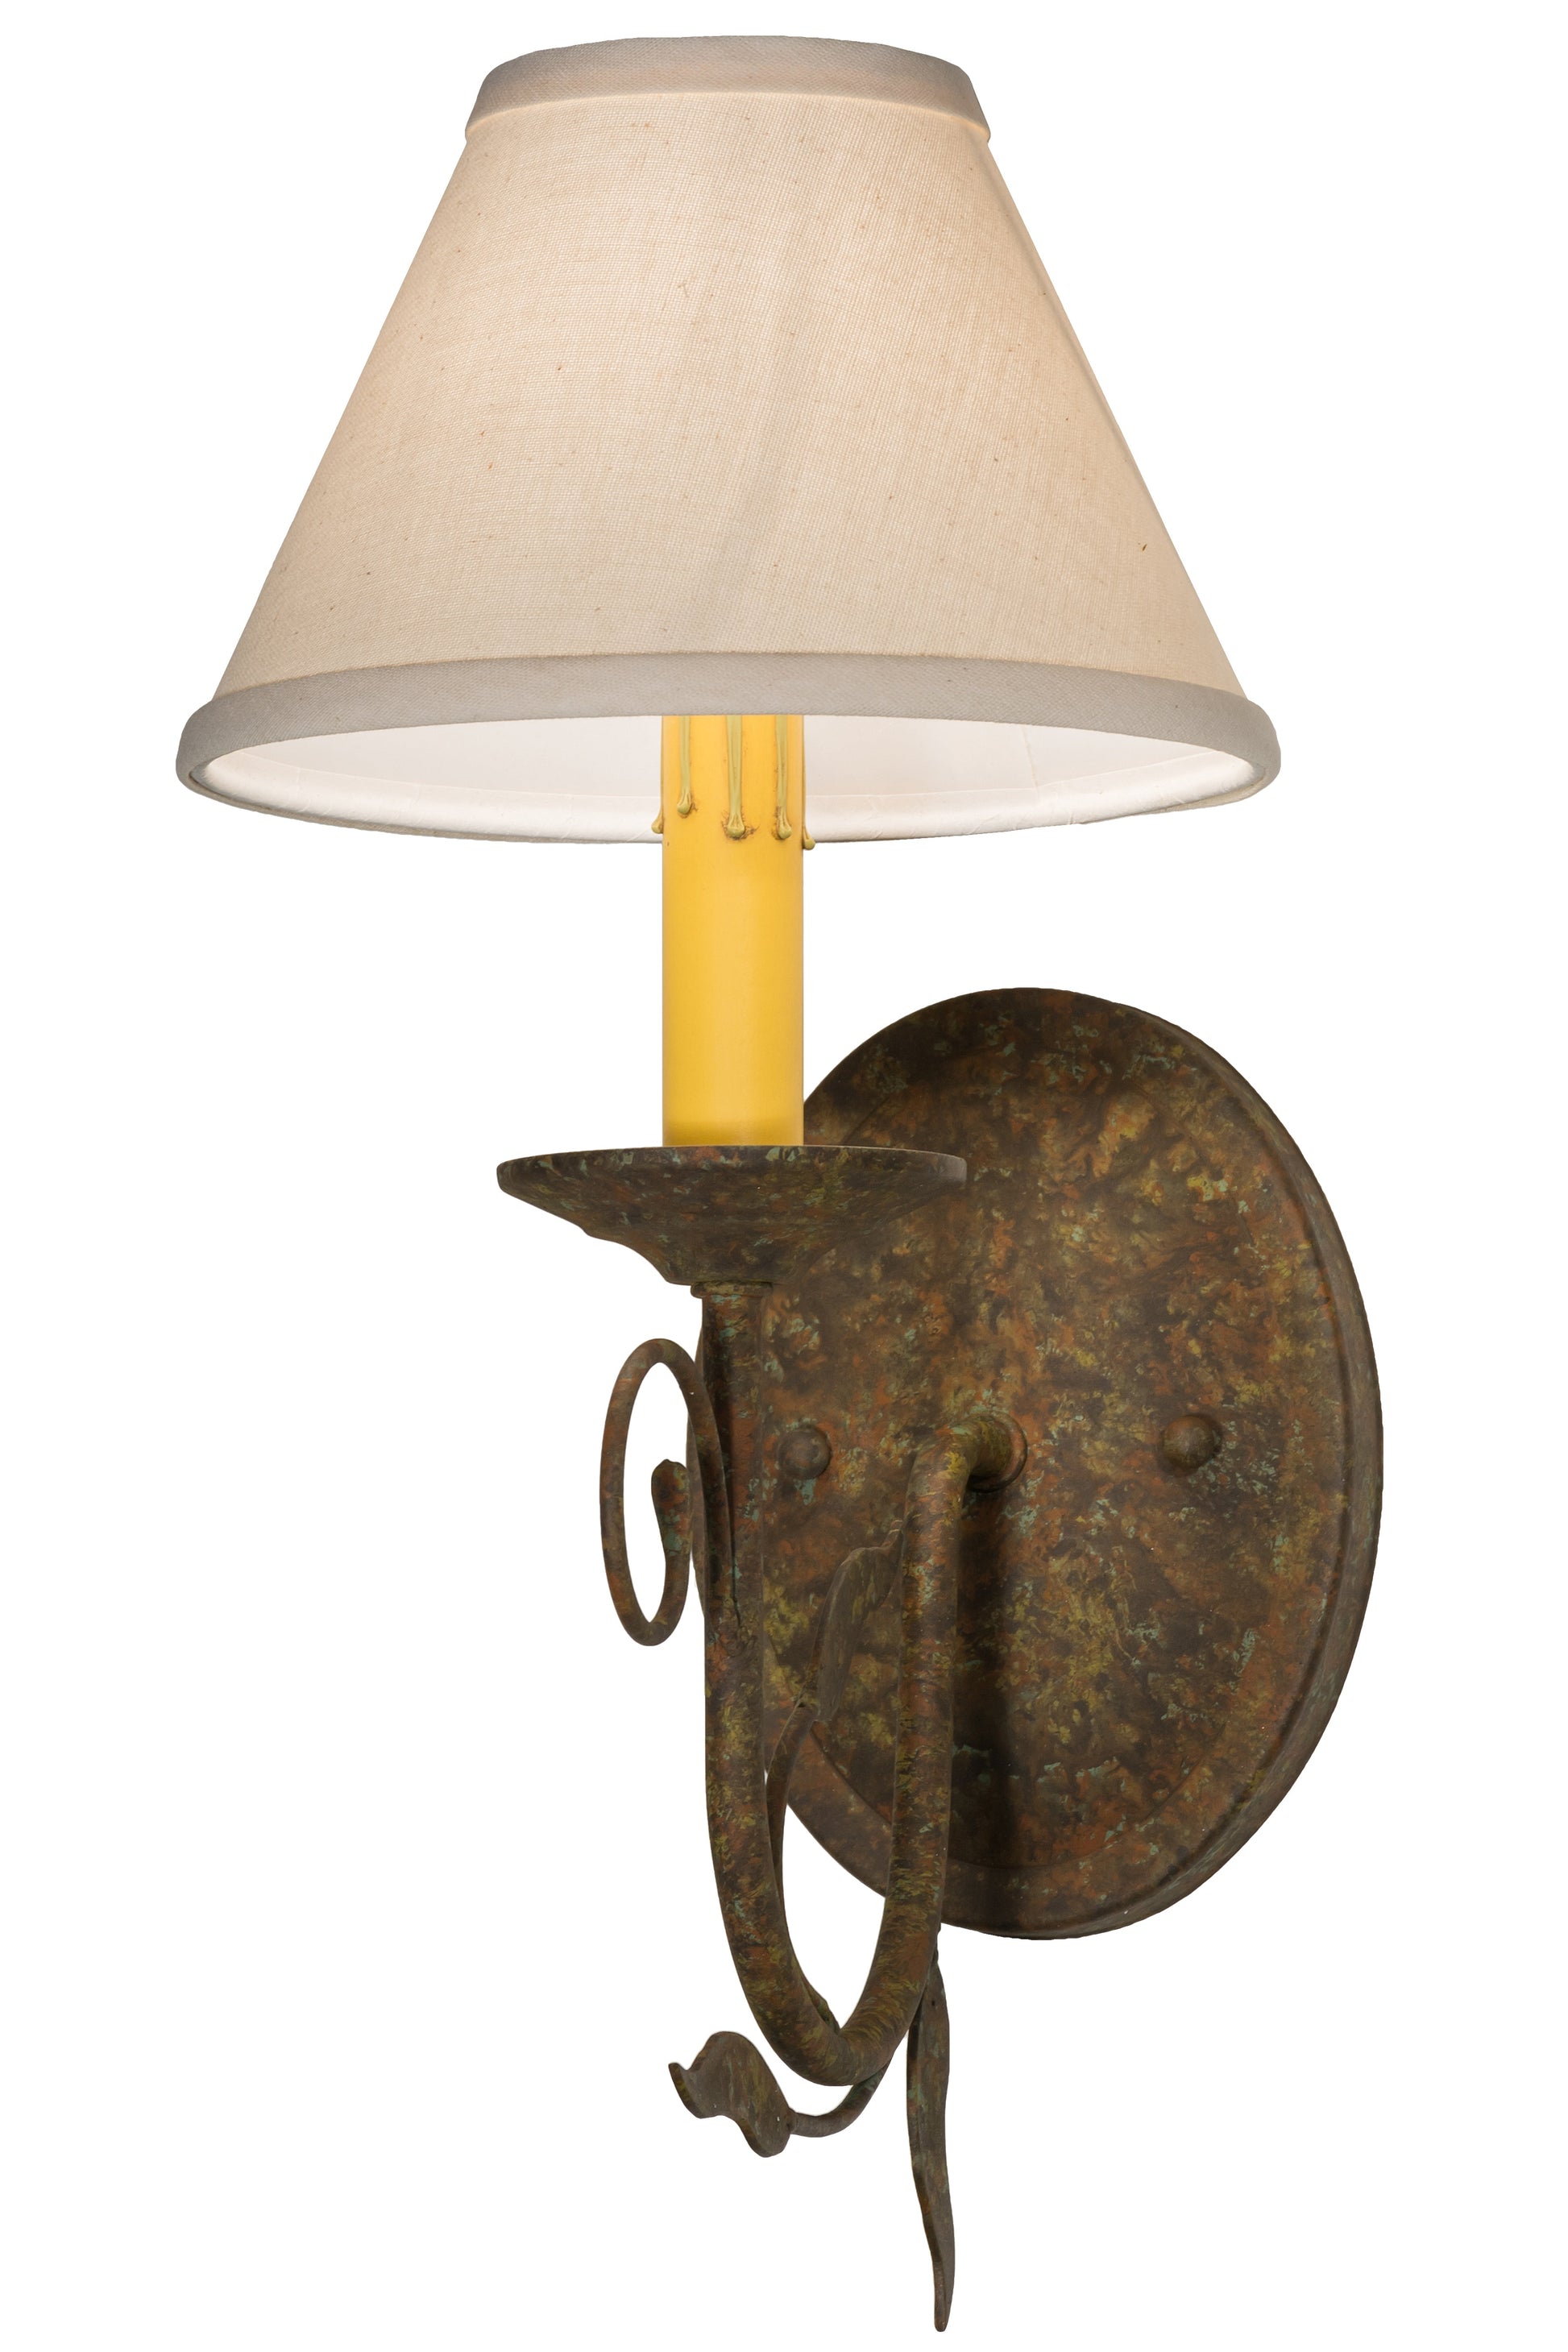 7" Bordeaux Wall Sconce by 2nd Ave Lighting